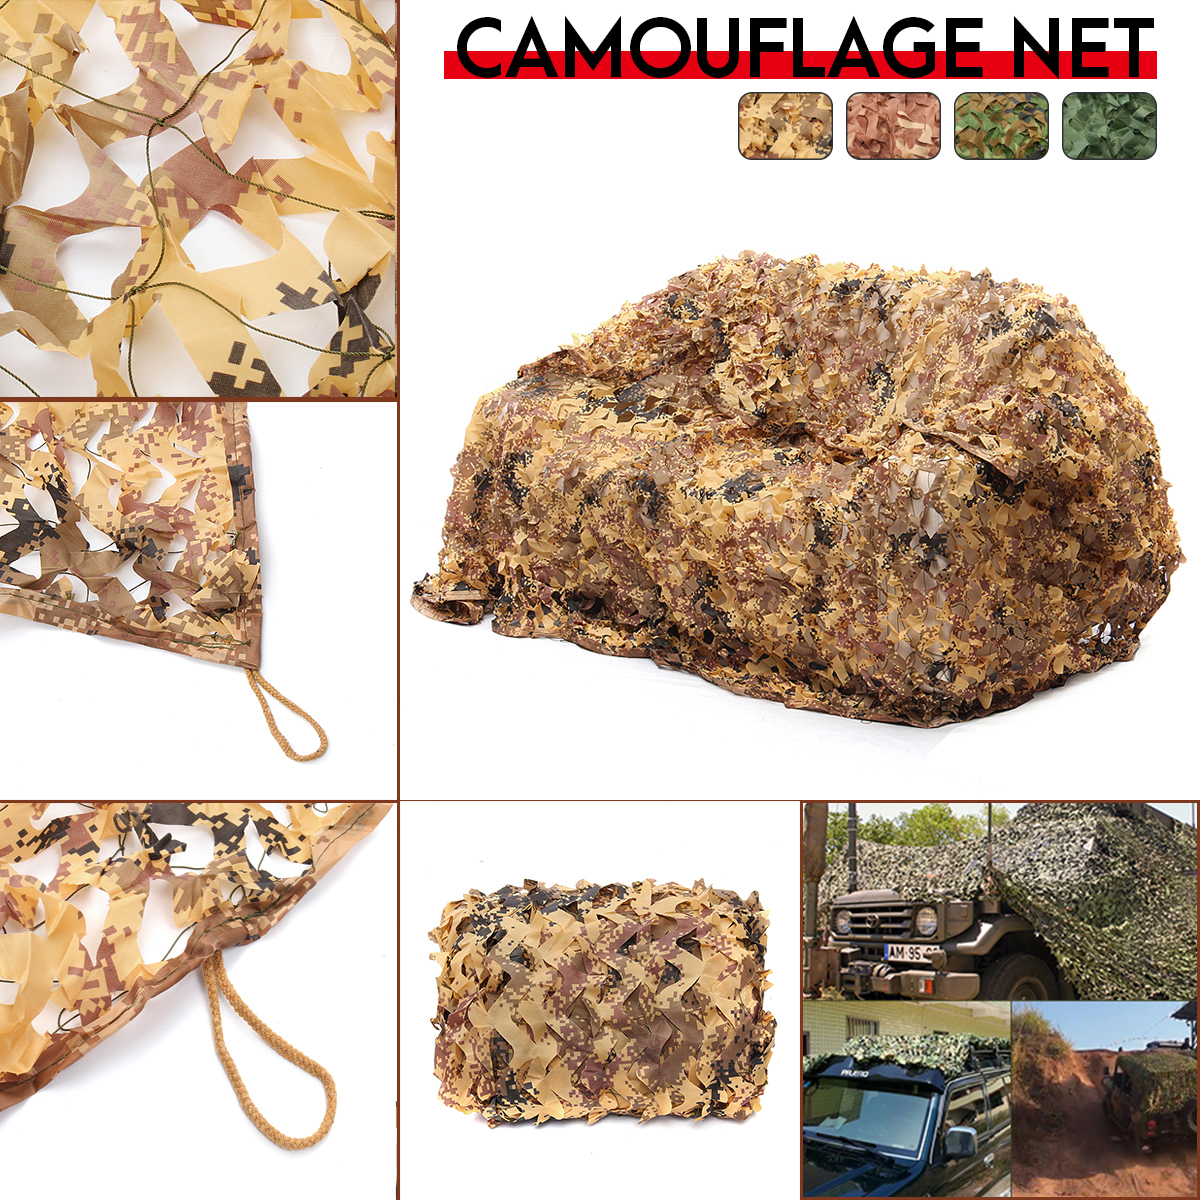 2mX3m-Digital-Desert-Camo-Netting-Camouflage-Net-for-Car-Cover-Camping-Woodland-Military-Hunting-1357864